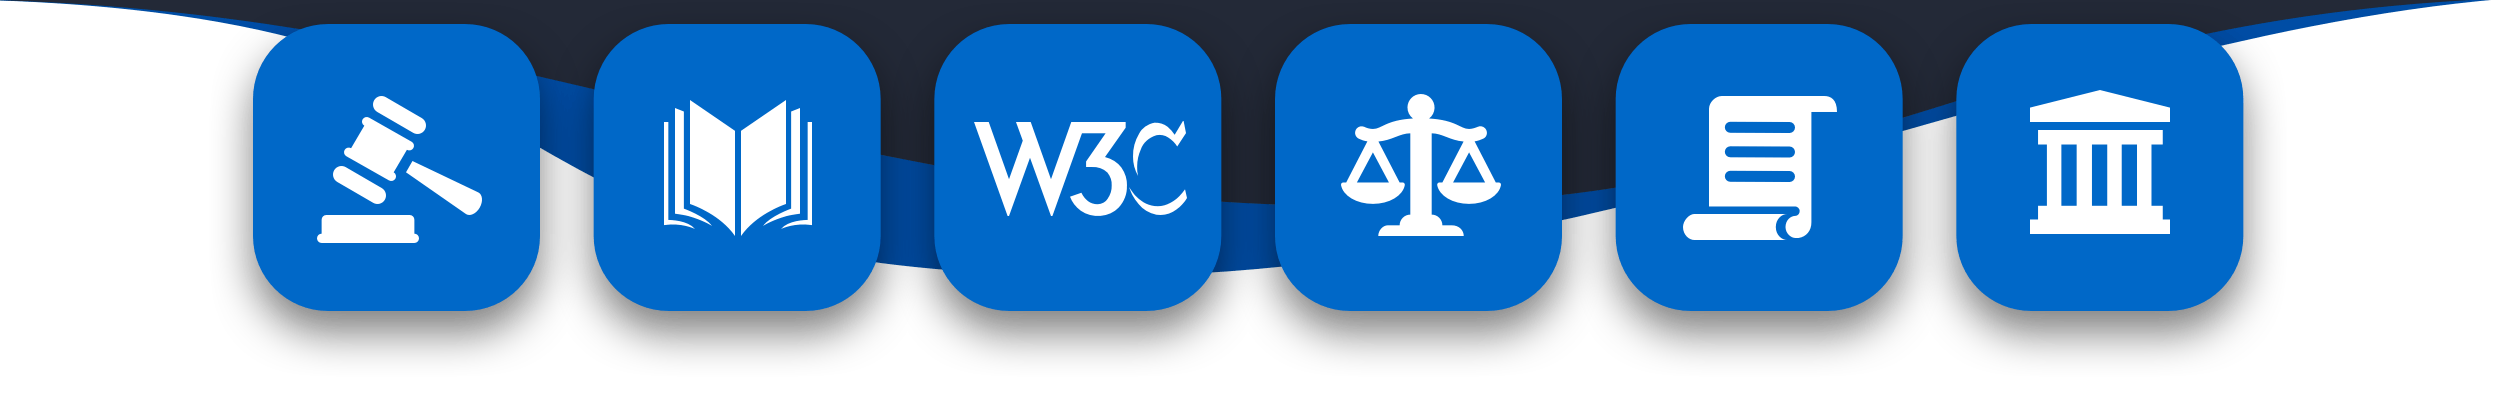 Symbols representing legislation including a gavel, a book, the W3C logo, scales, a document, and a government building.